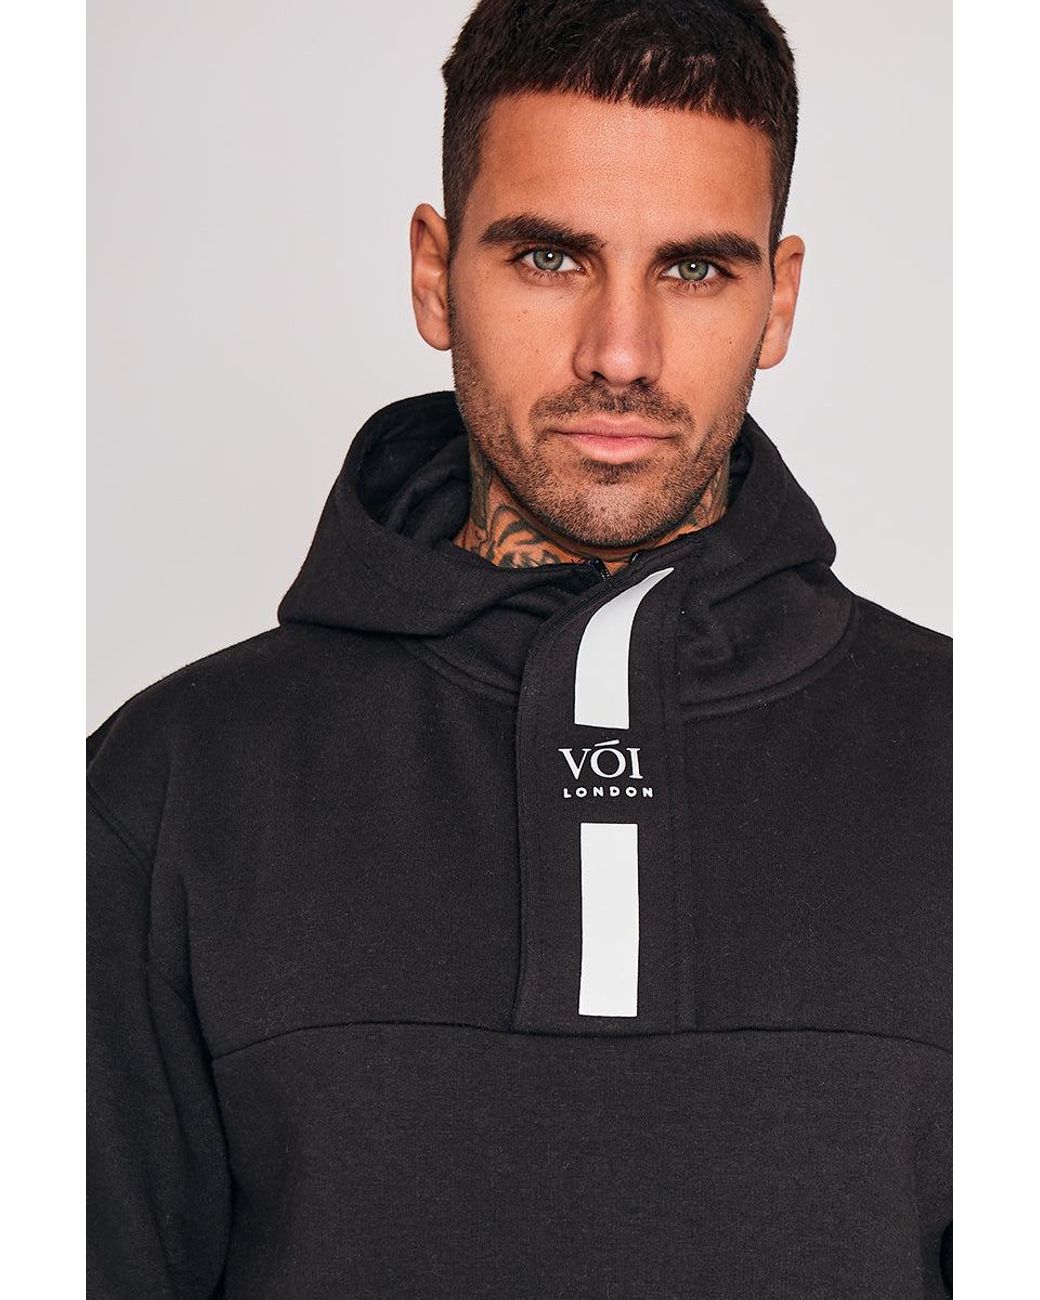 Mens Clothing Activewear Voi London Fleece Greenwich Tracksuit for Men gym and workout clothes Tracksuits and sweat suits 